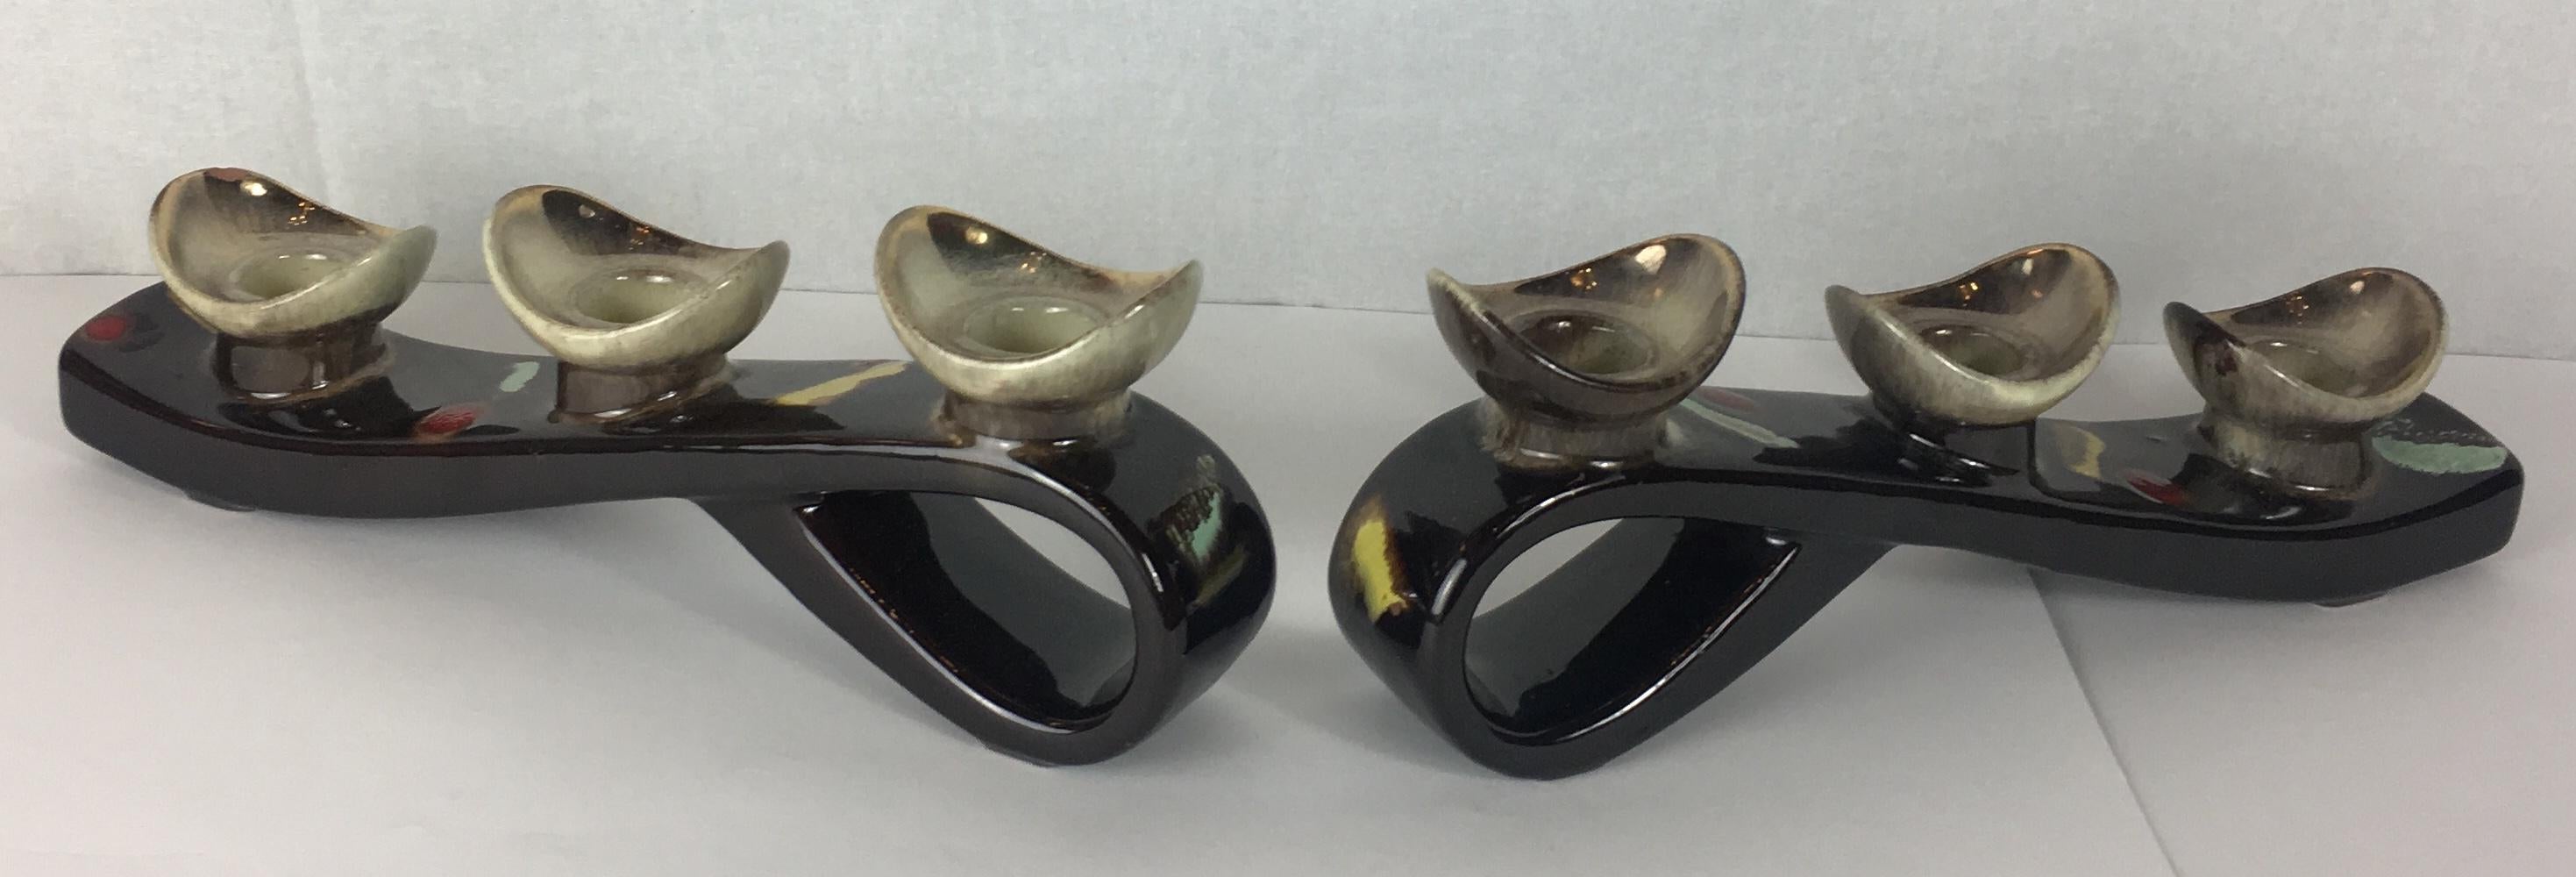 Pair of Mid-Century Modern Glazed Ceramic Candleholders, Vallauris For Sale 1